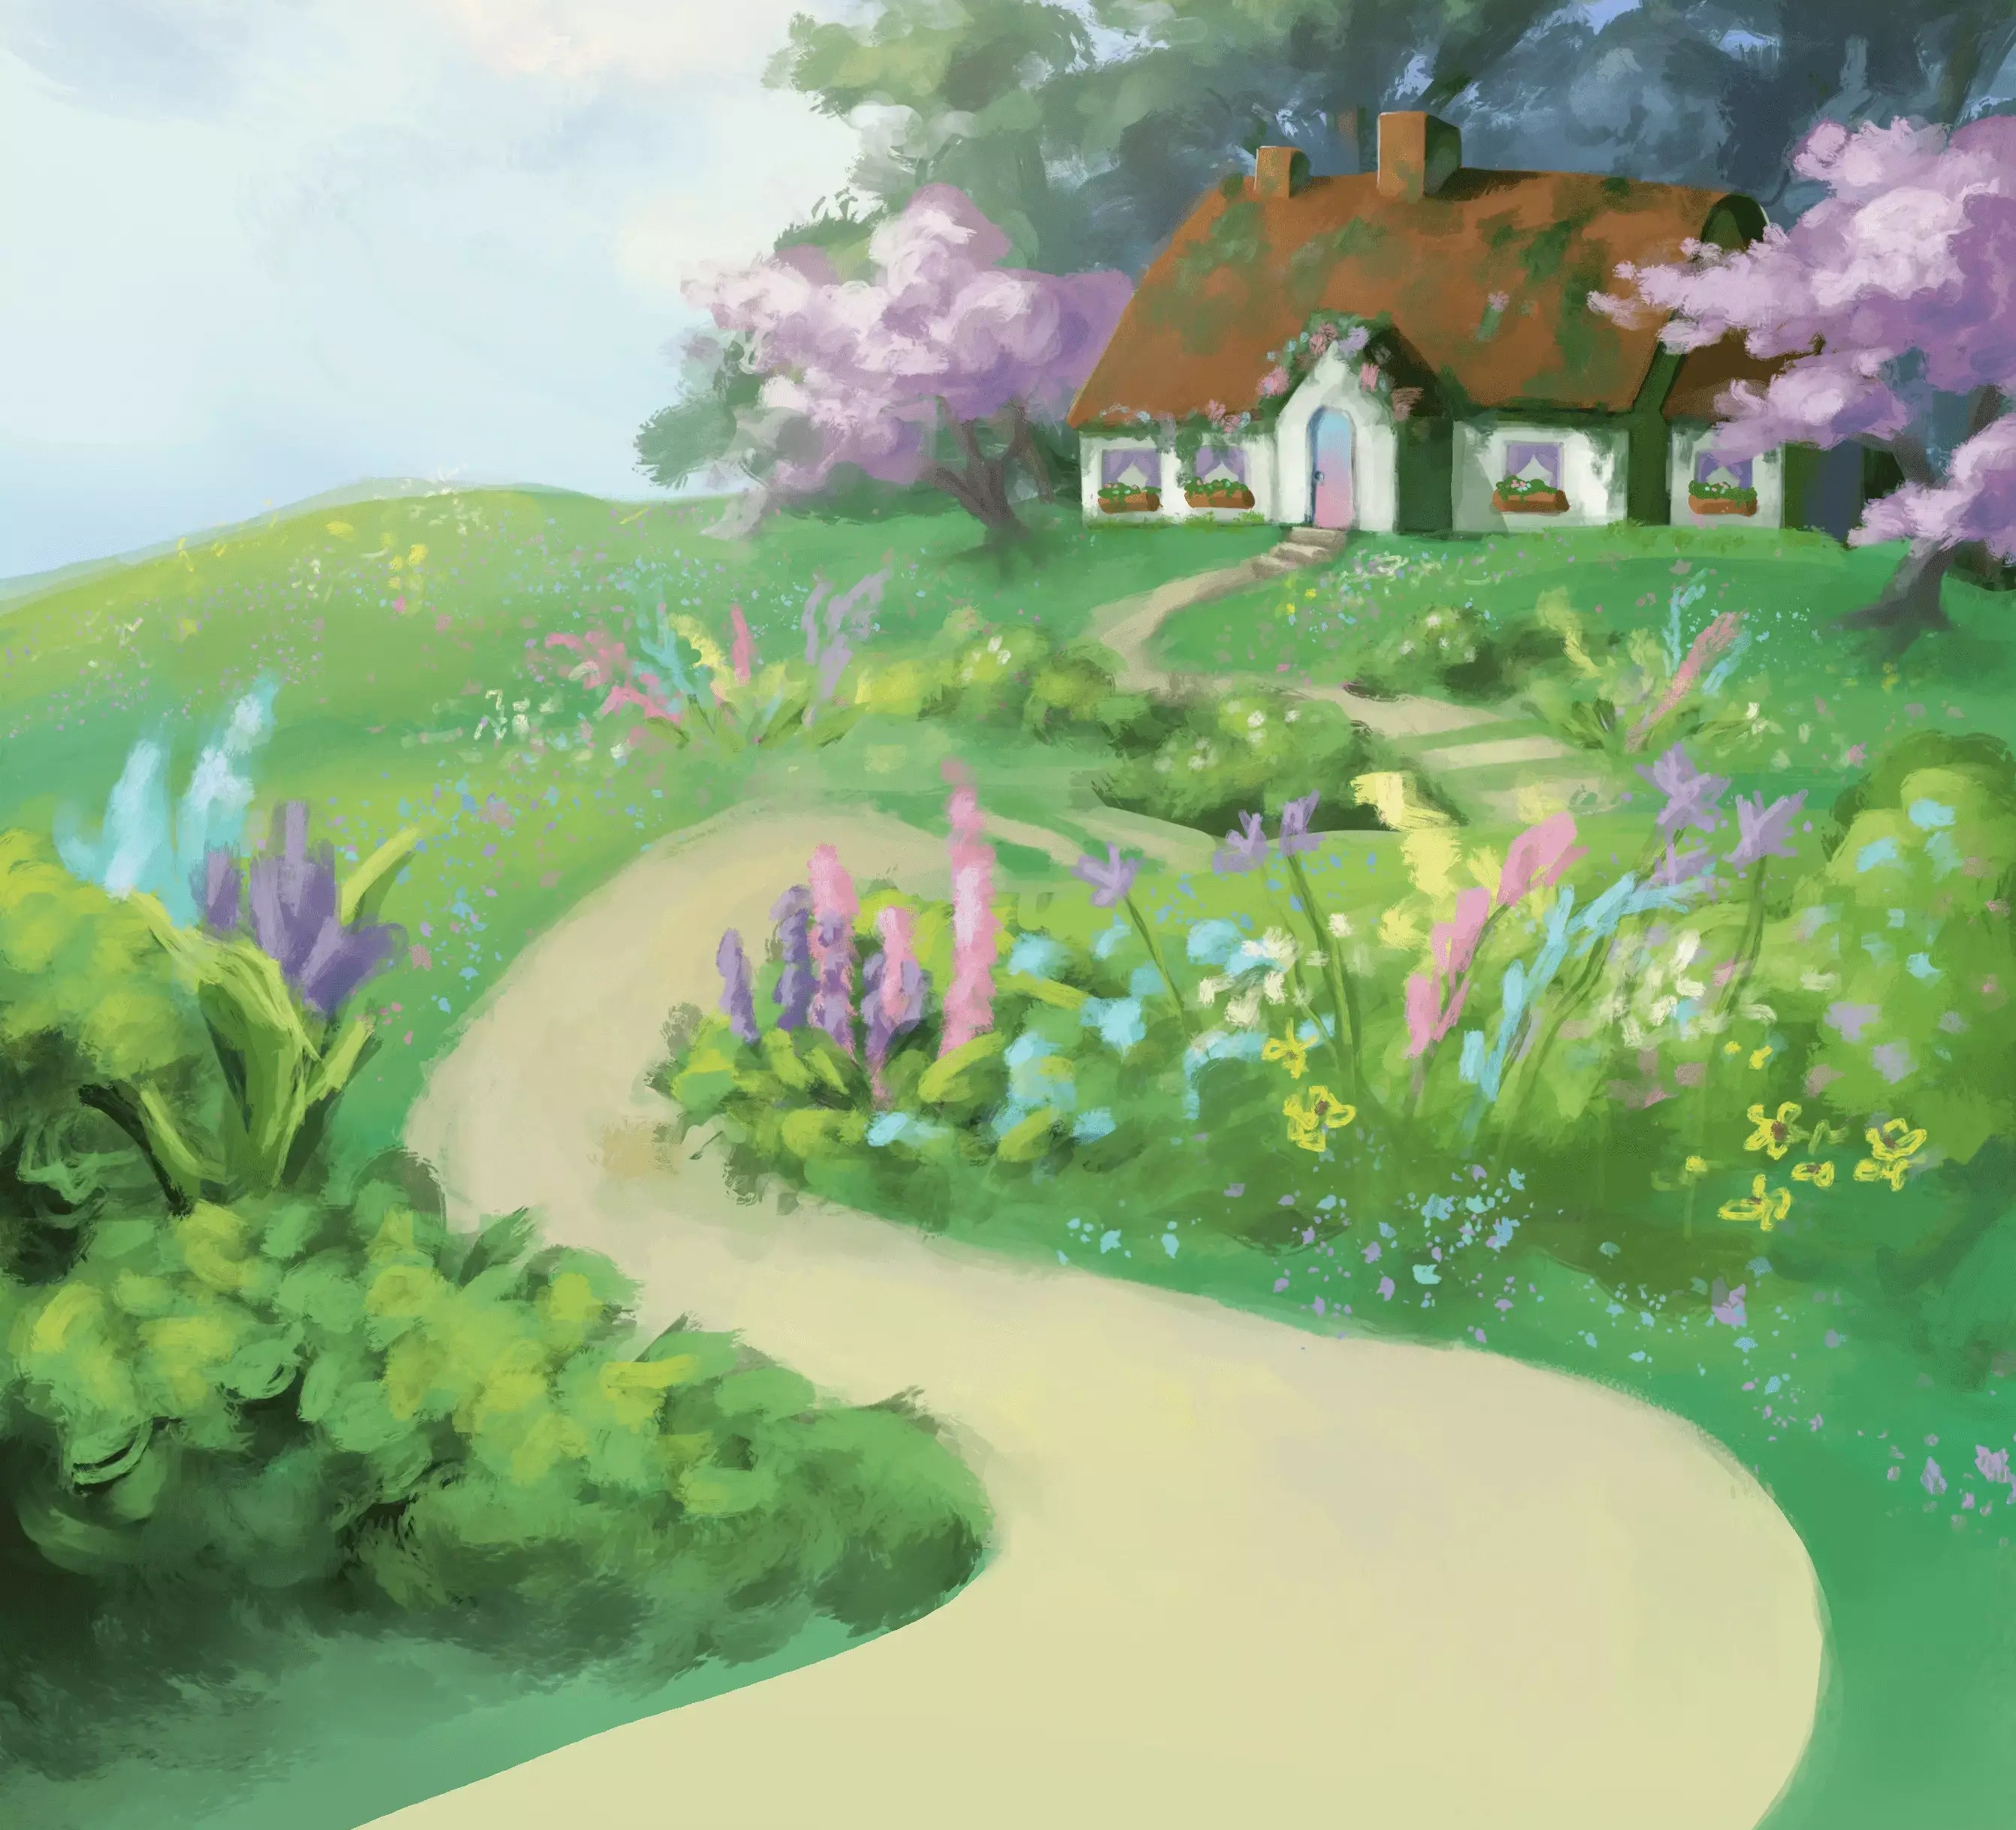 Technica 2021 Welcome Home: A cottage surrounded by a grassy field filled with pastel plants.